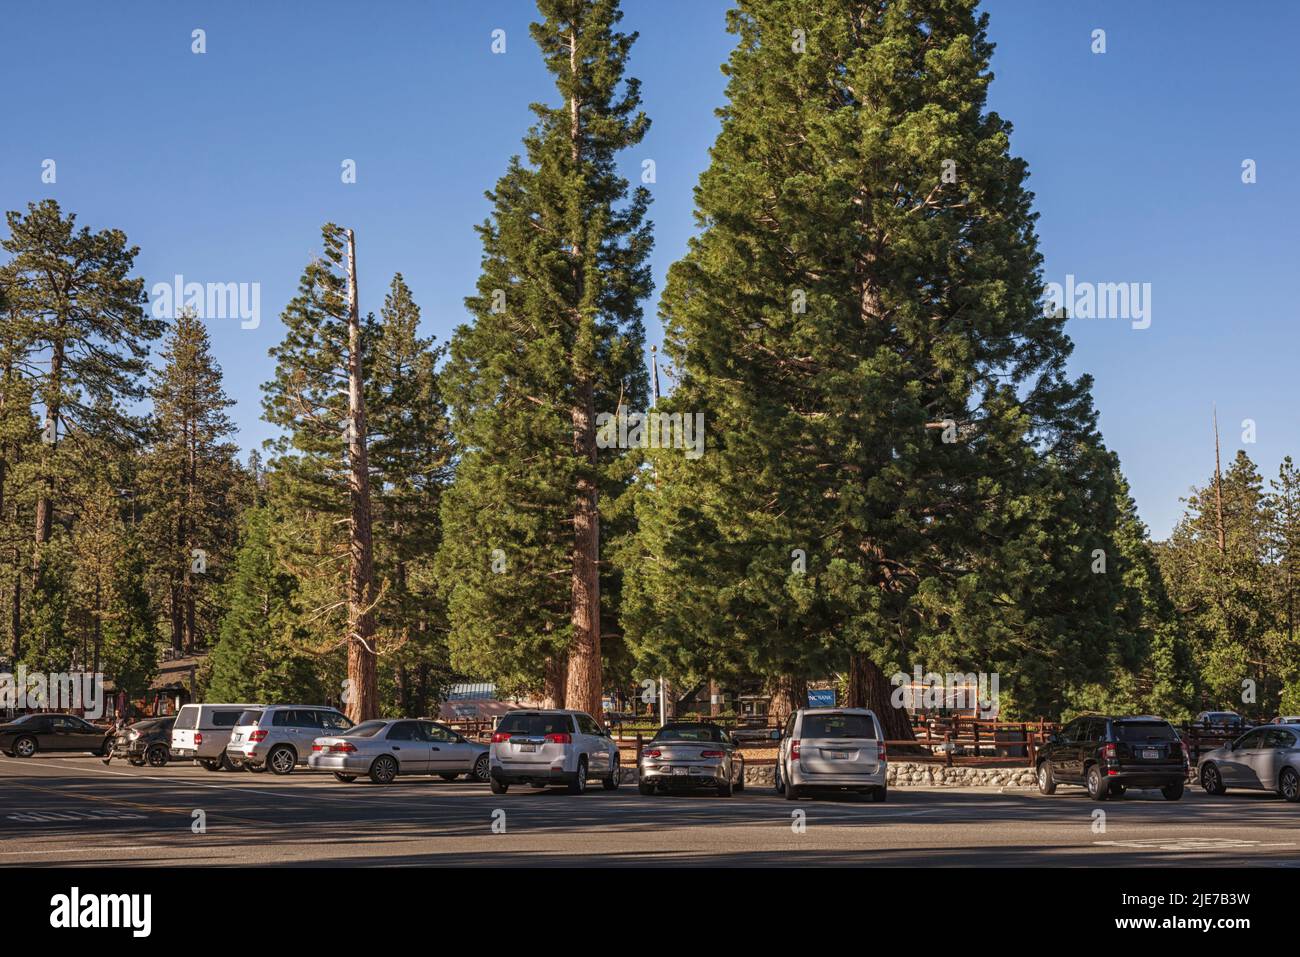 The center of town in Idyllwild, California, USA. Stock Photo